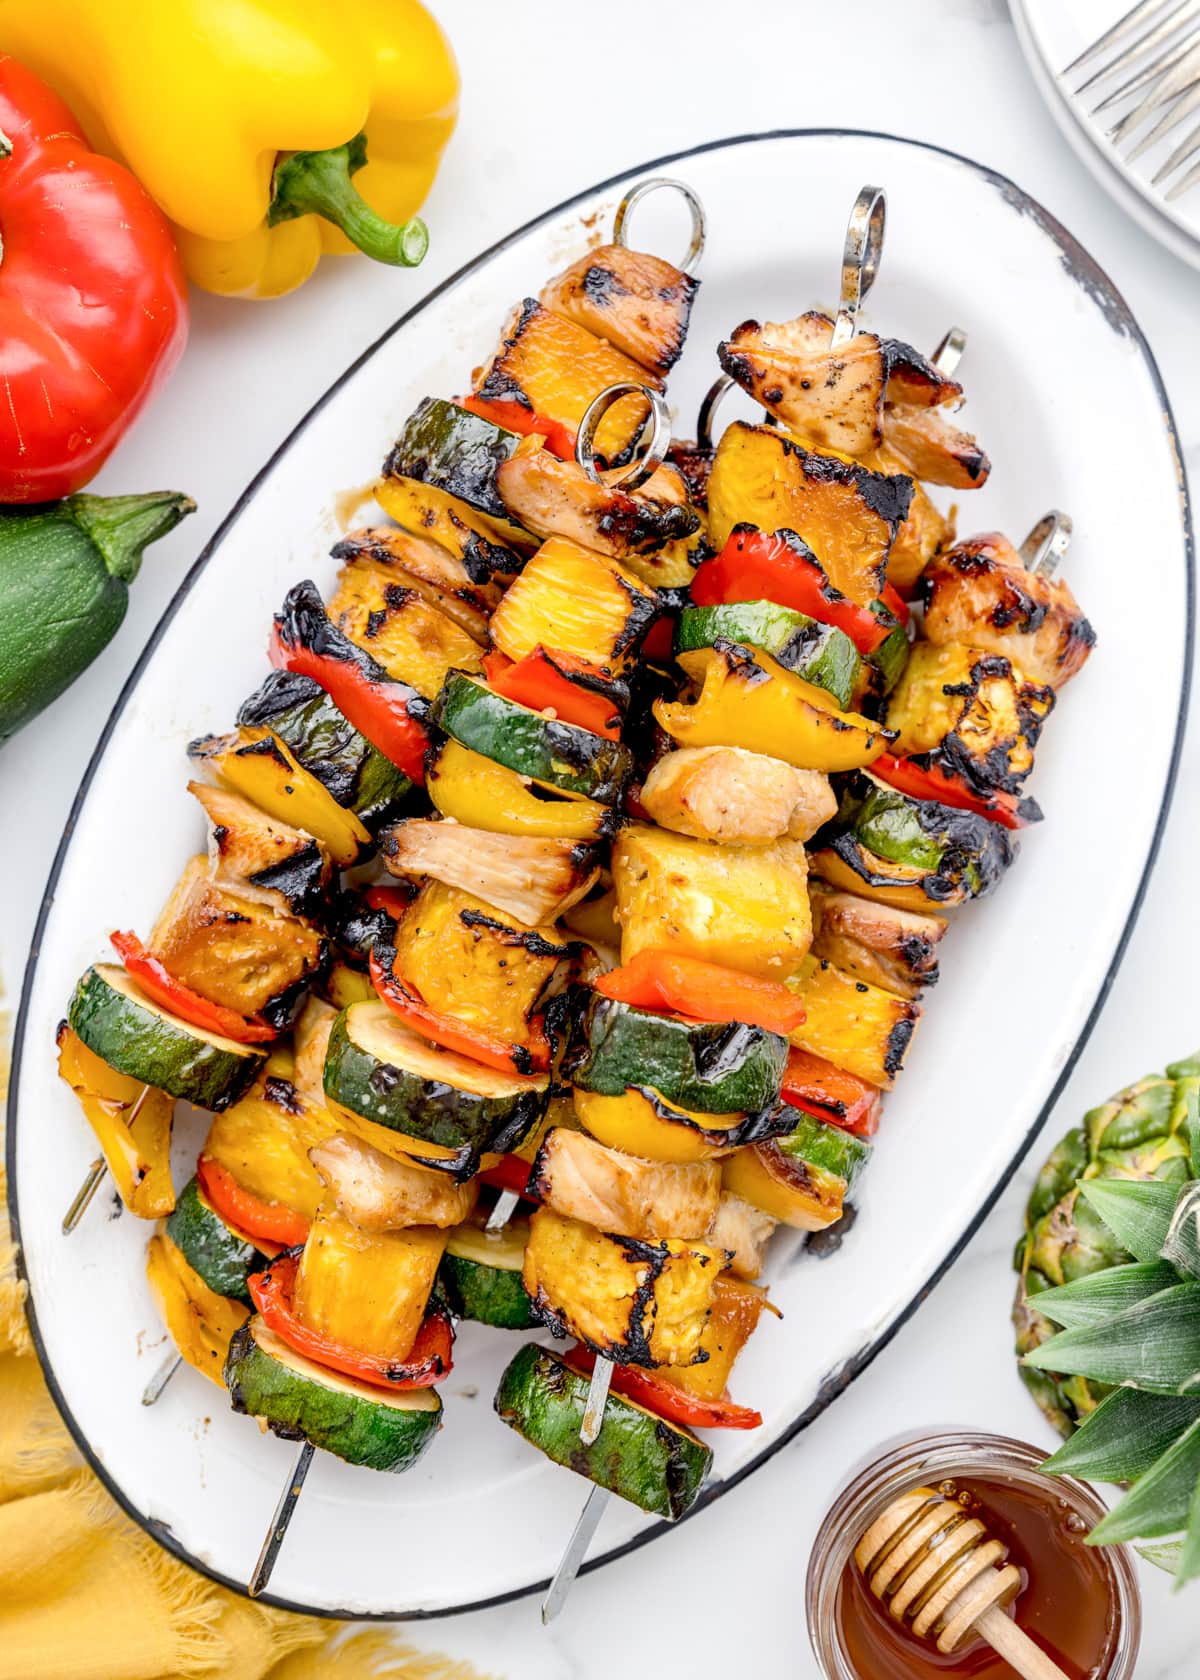 Grilled chicken kabobs on metal skewers, served on a white platter.